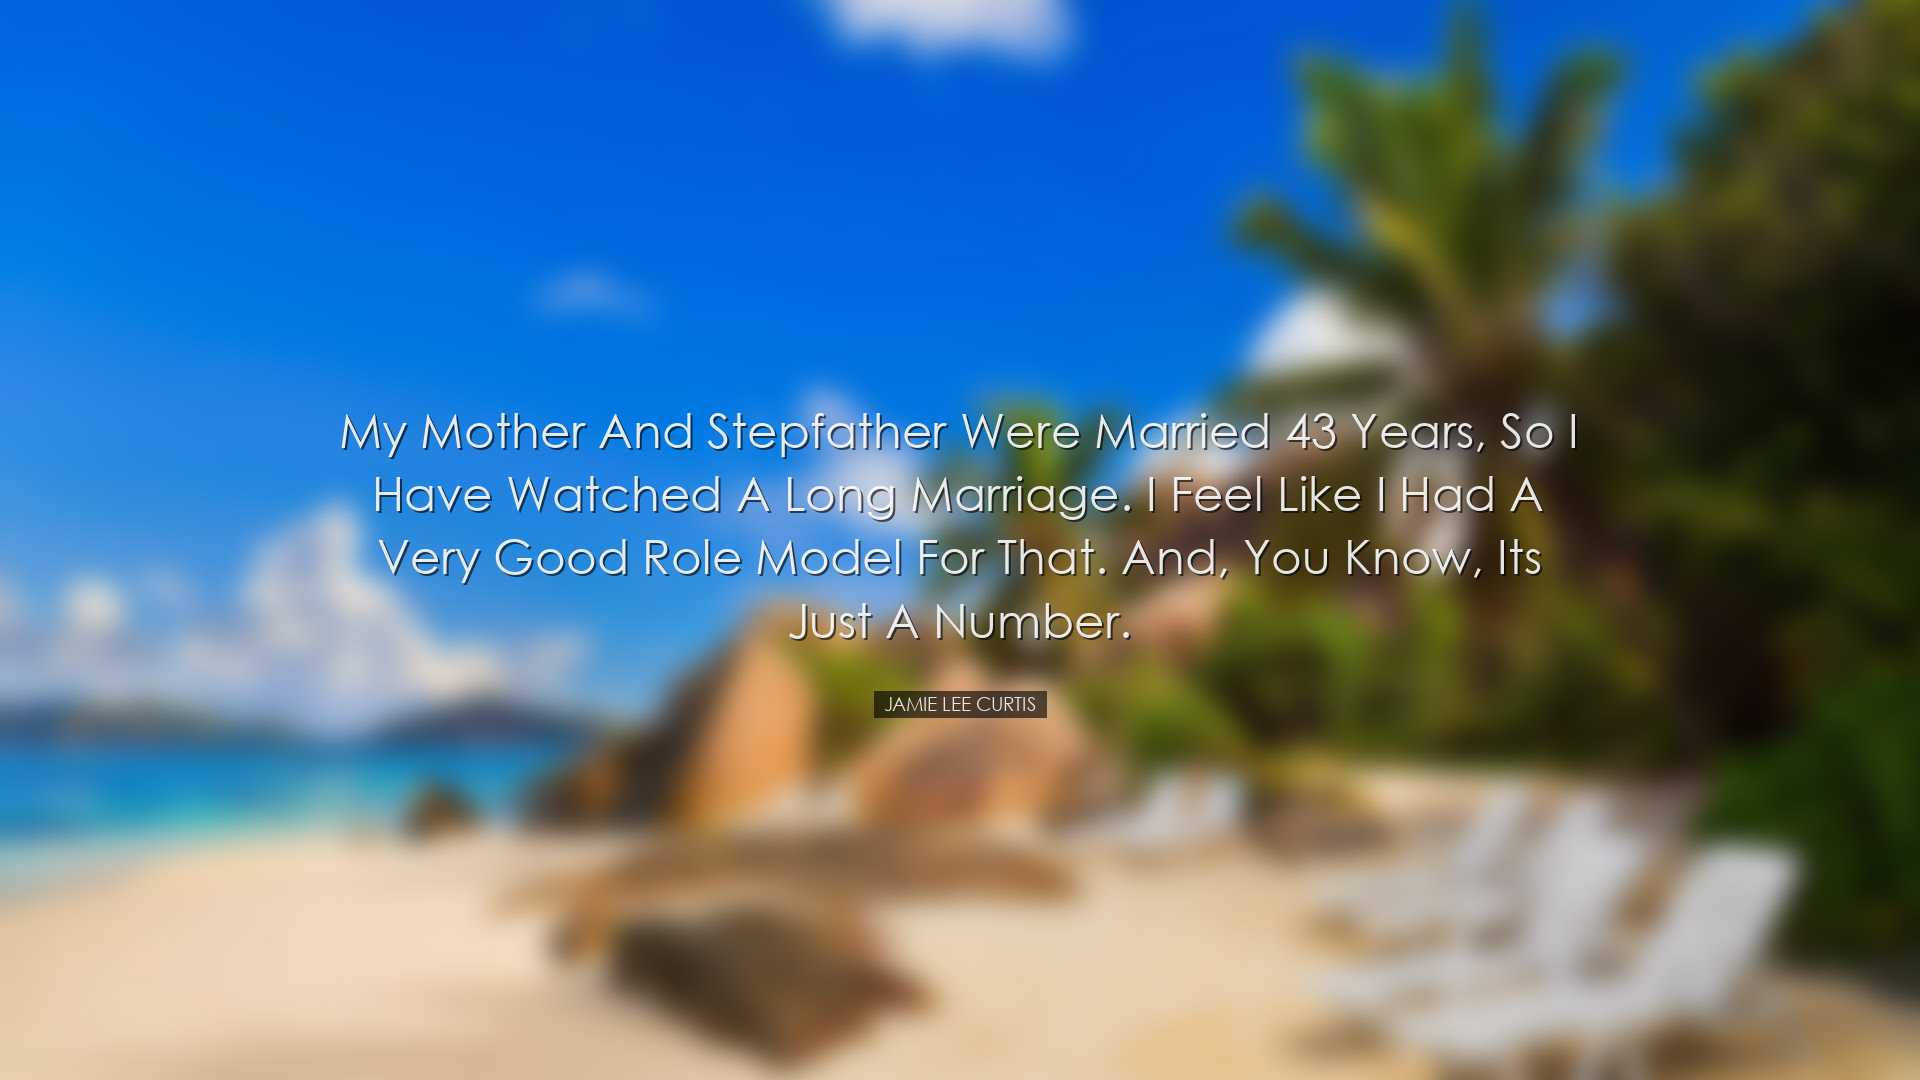 My mother and stepfather were married 43 years, so I have watched